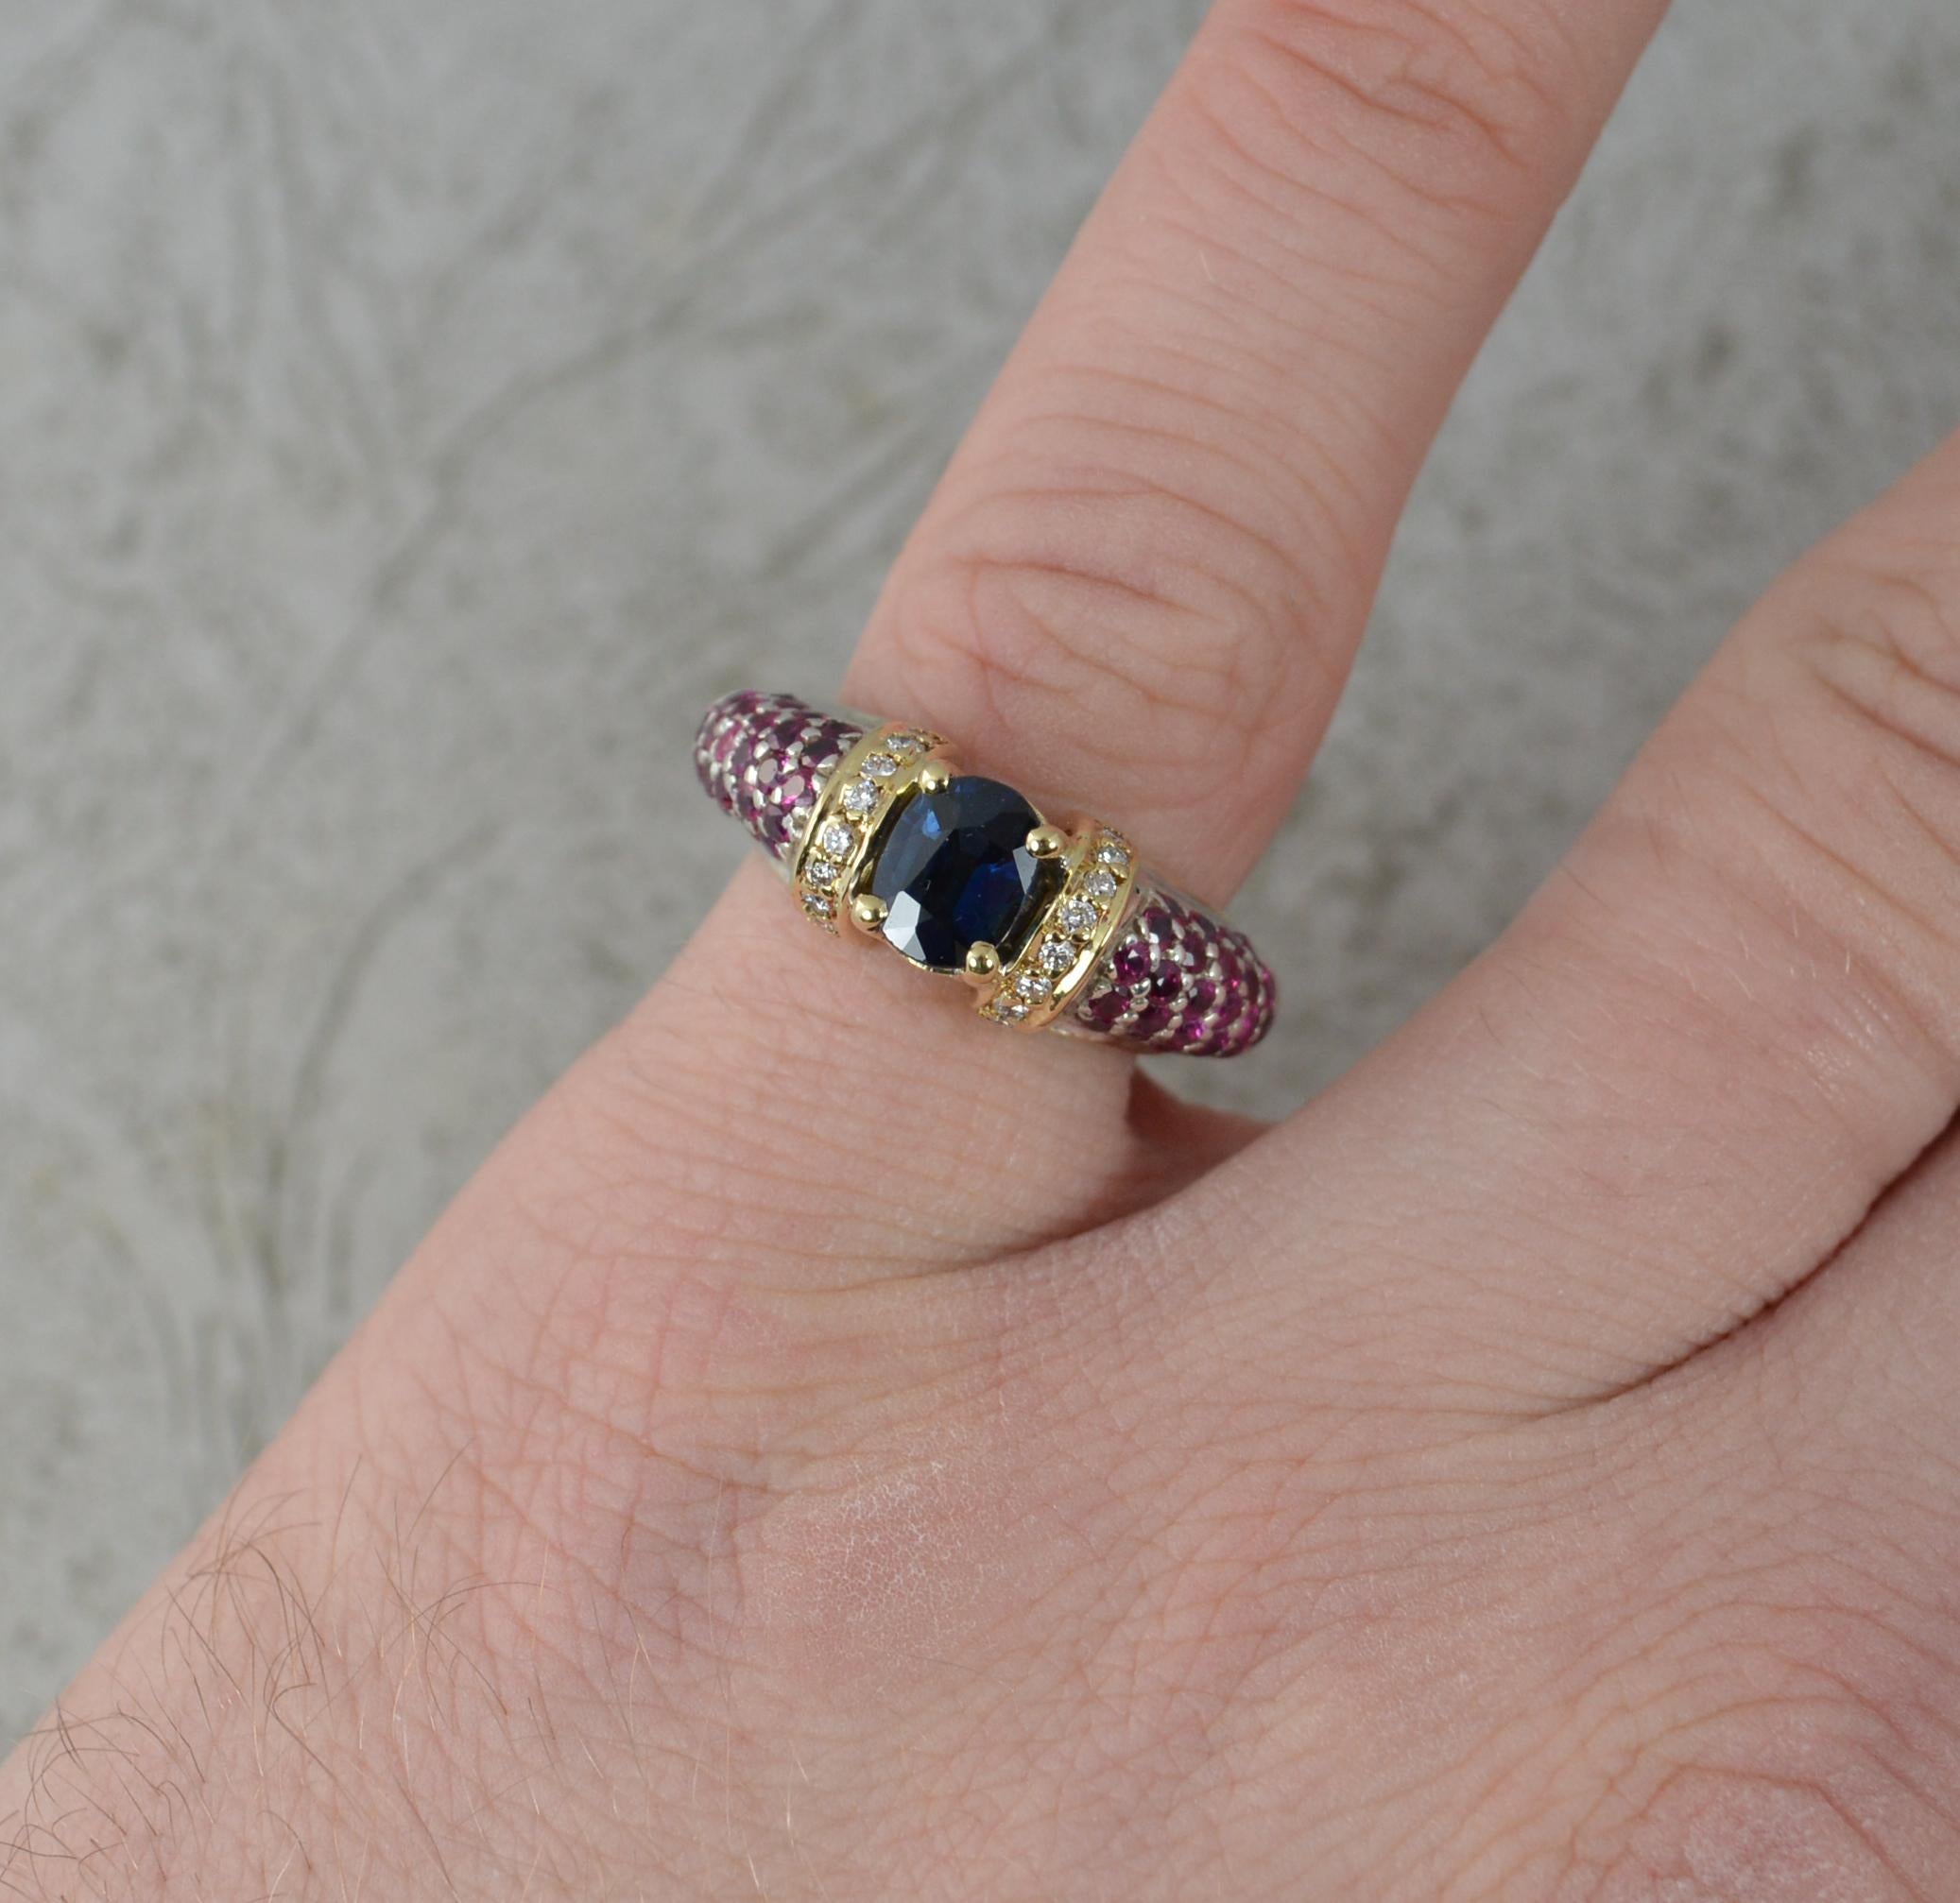 A striking Urart designer ring.
Modelled in solid 18 carat white gold with a yellow gold inner ring and head setting for the sapphire.
Designed with an oval cut blue sapphire to the centre, 5mm x 6.5mm approx. To each side runs a column of ten round